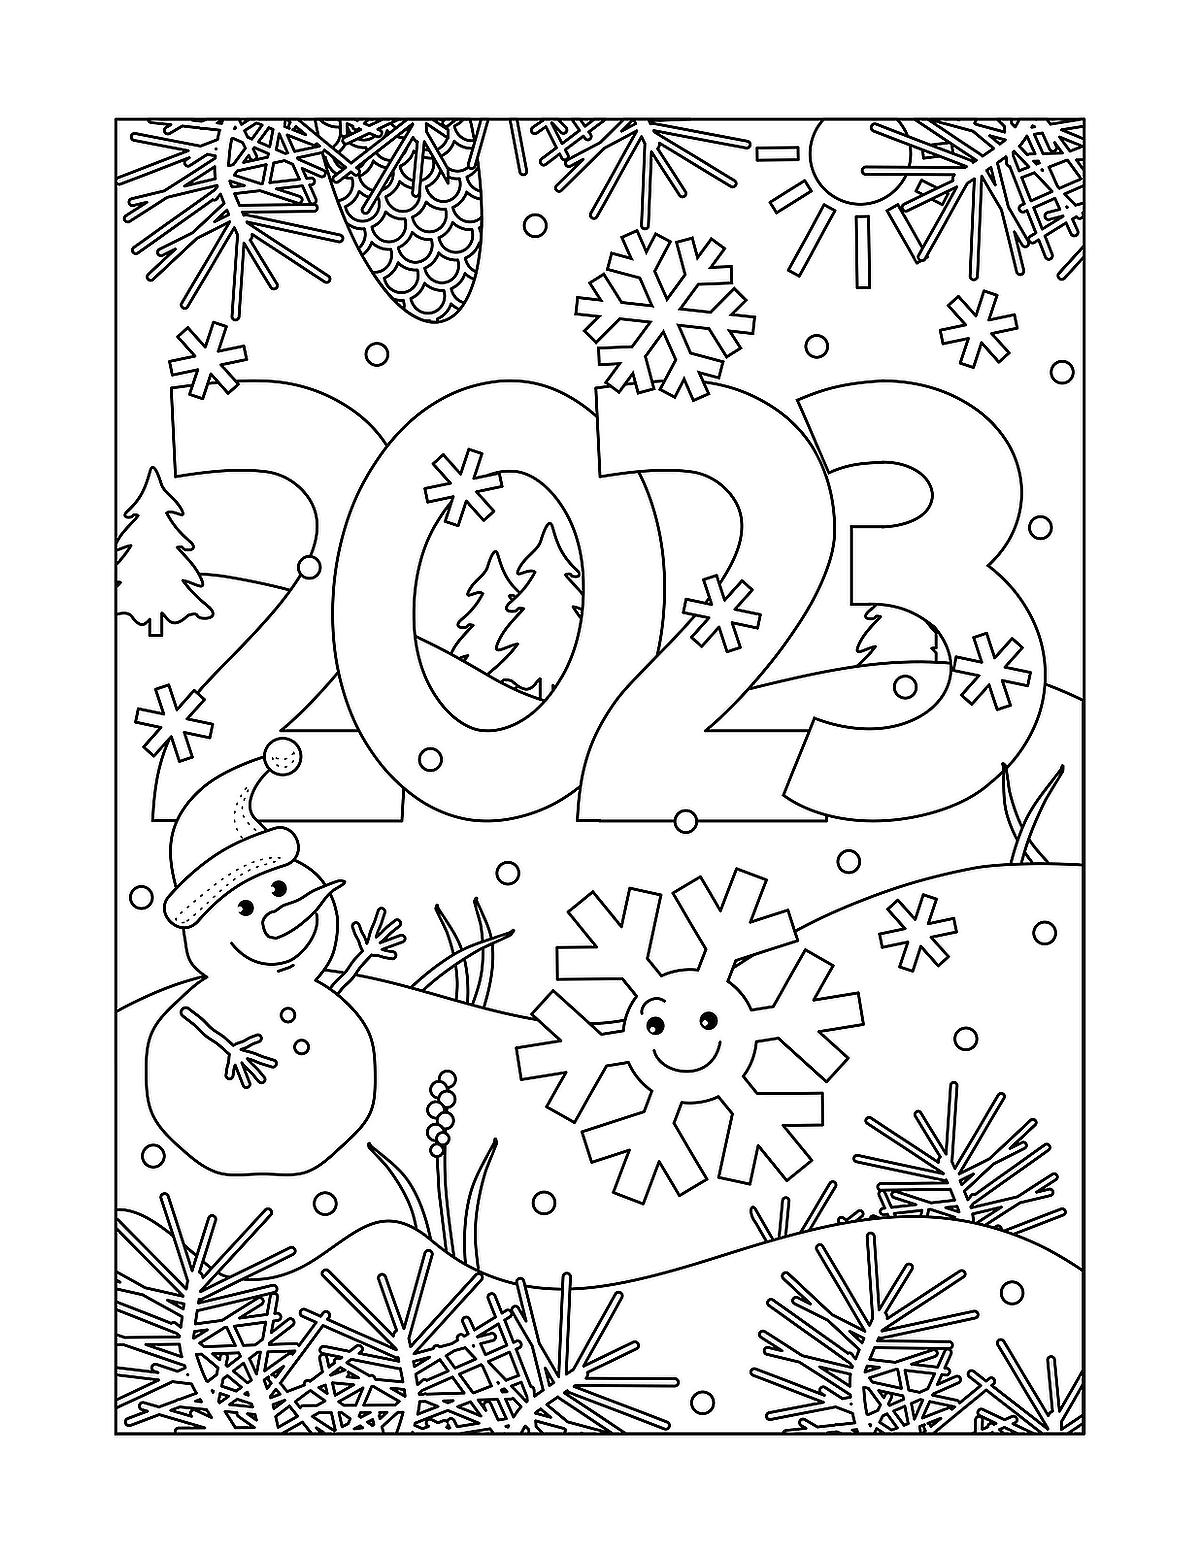 Coloring pages for kids fun free printable coloring activity pages for the new year printables mom